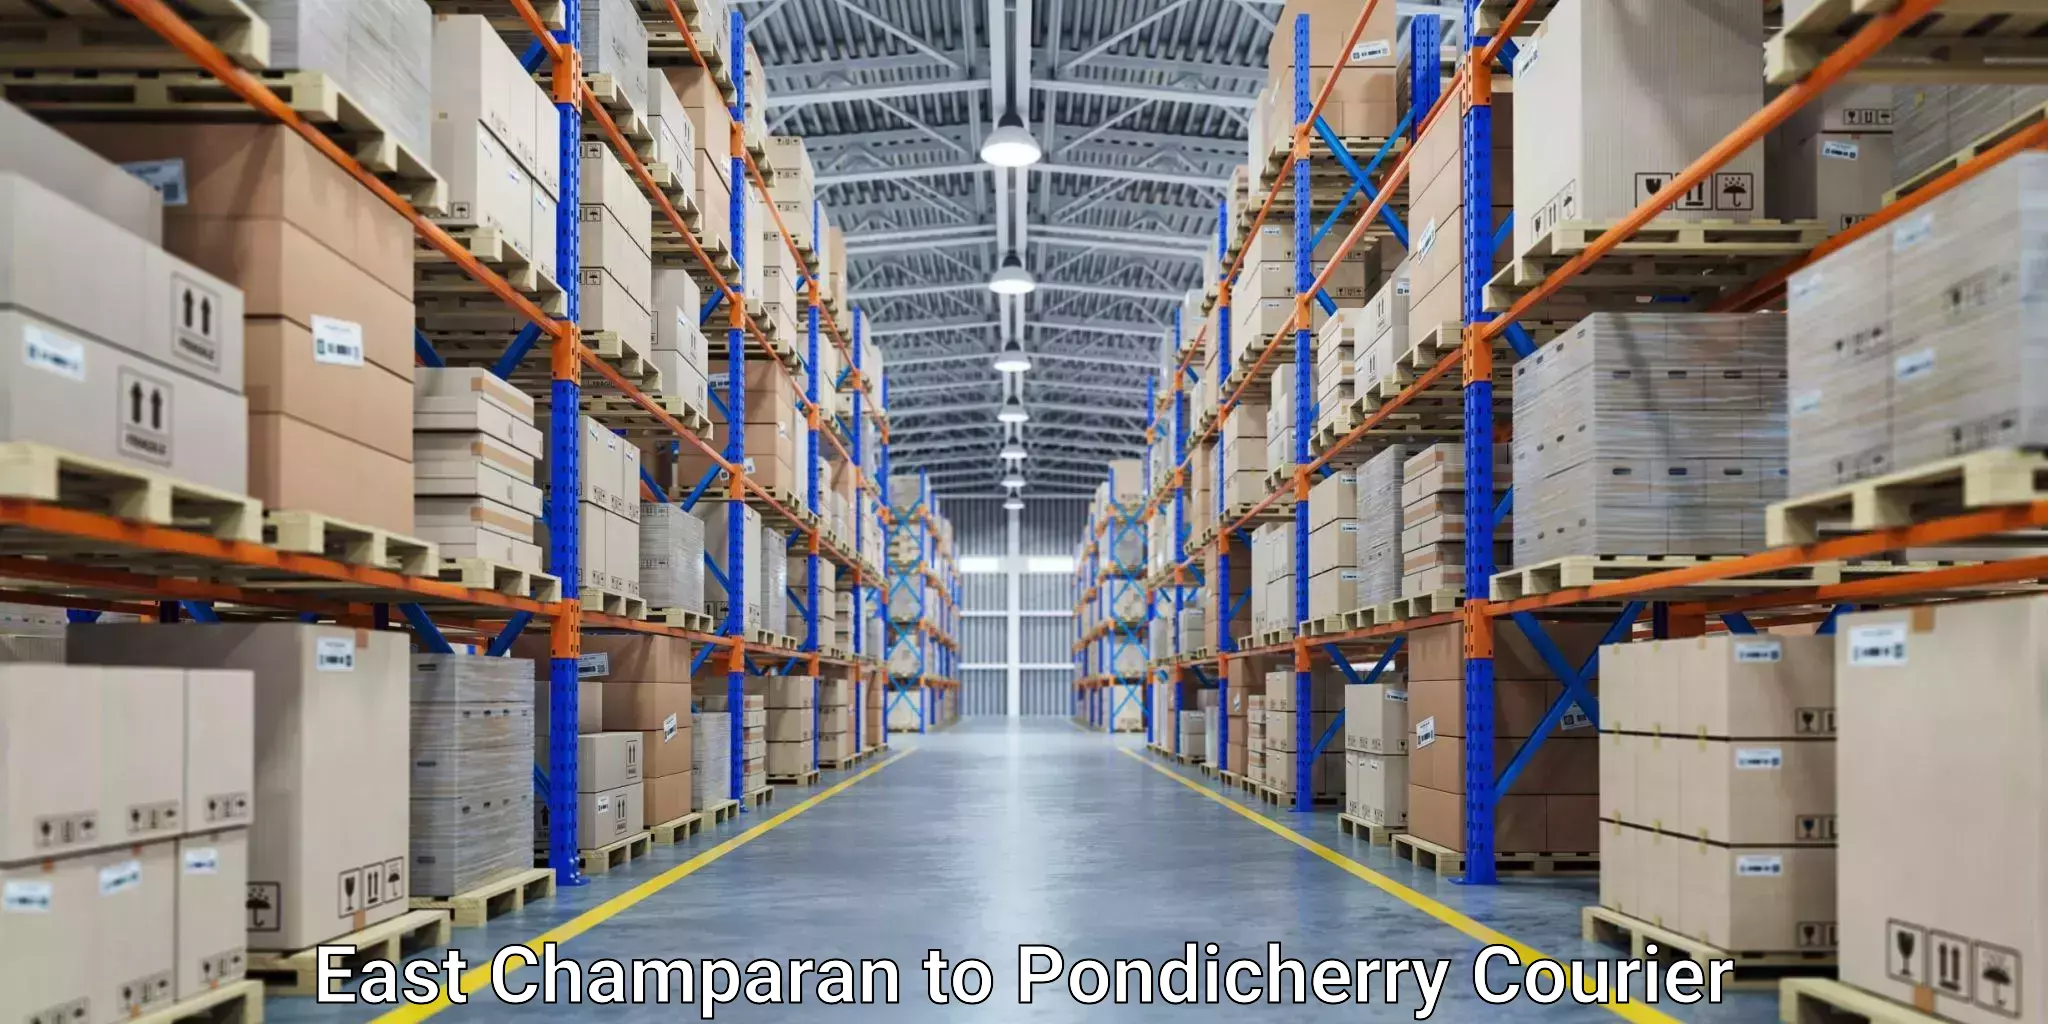 Courier service efficiency East Champaran to Pondicherry